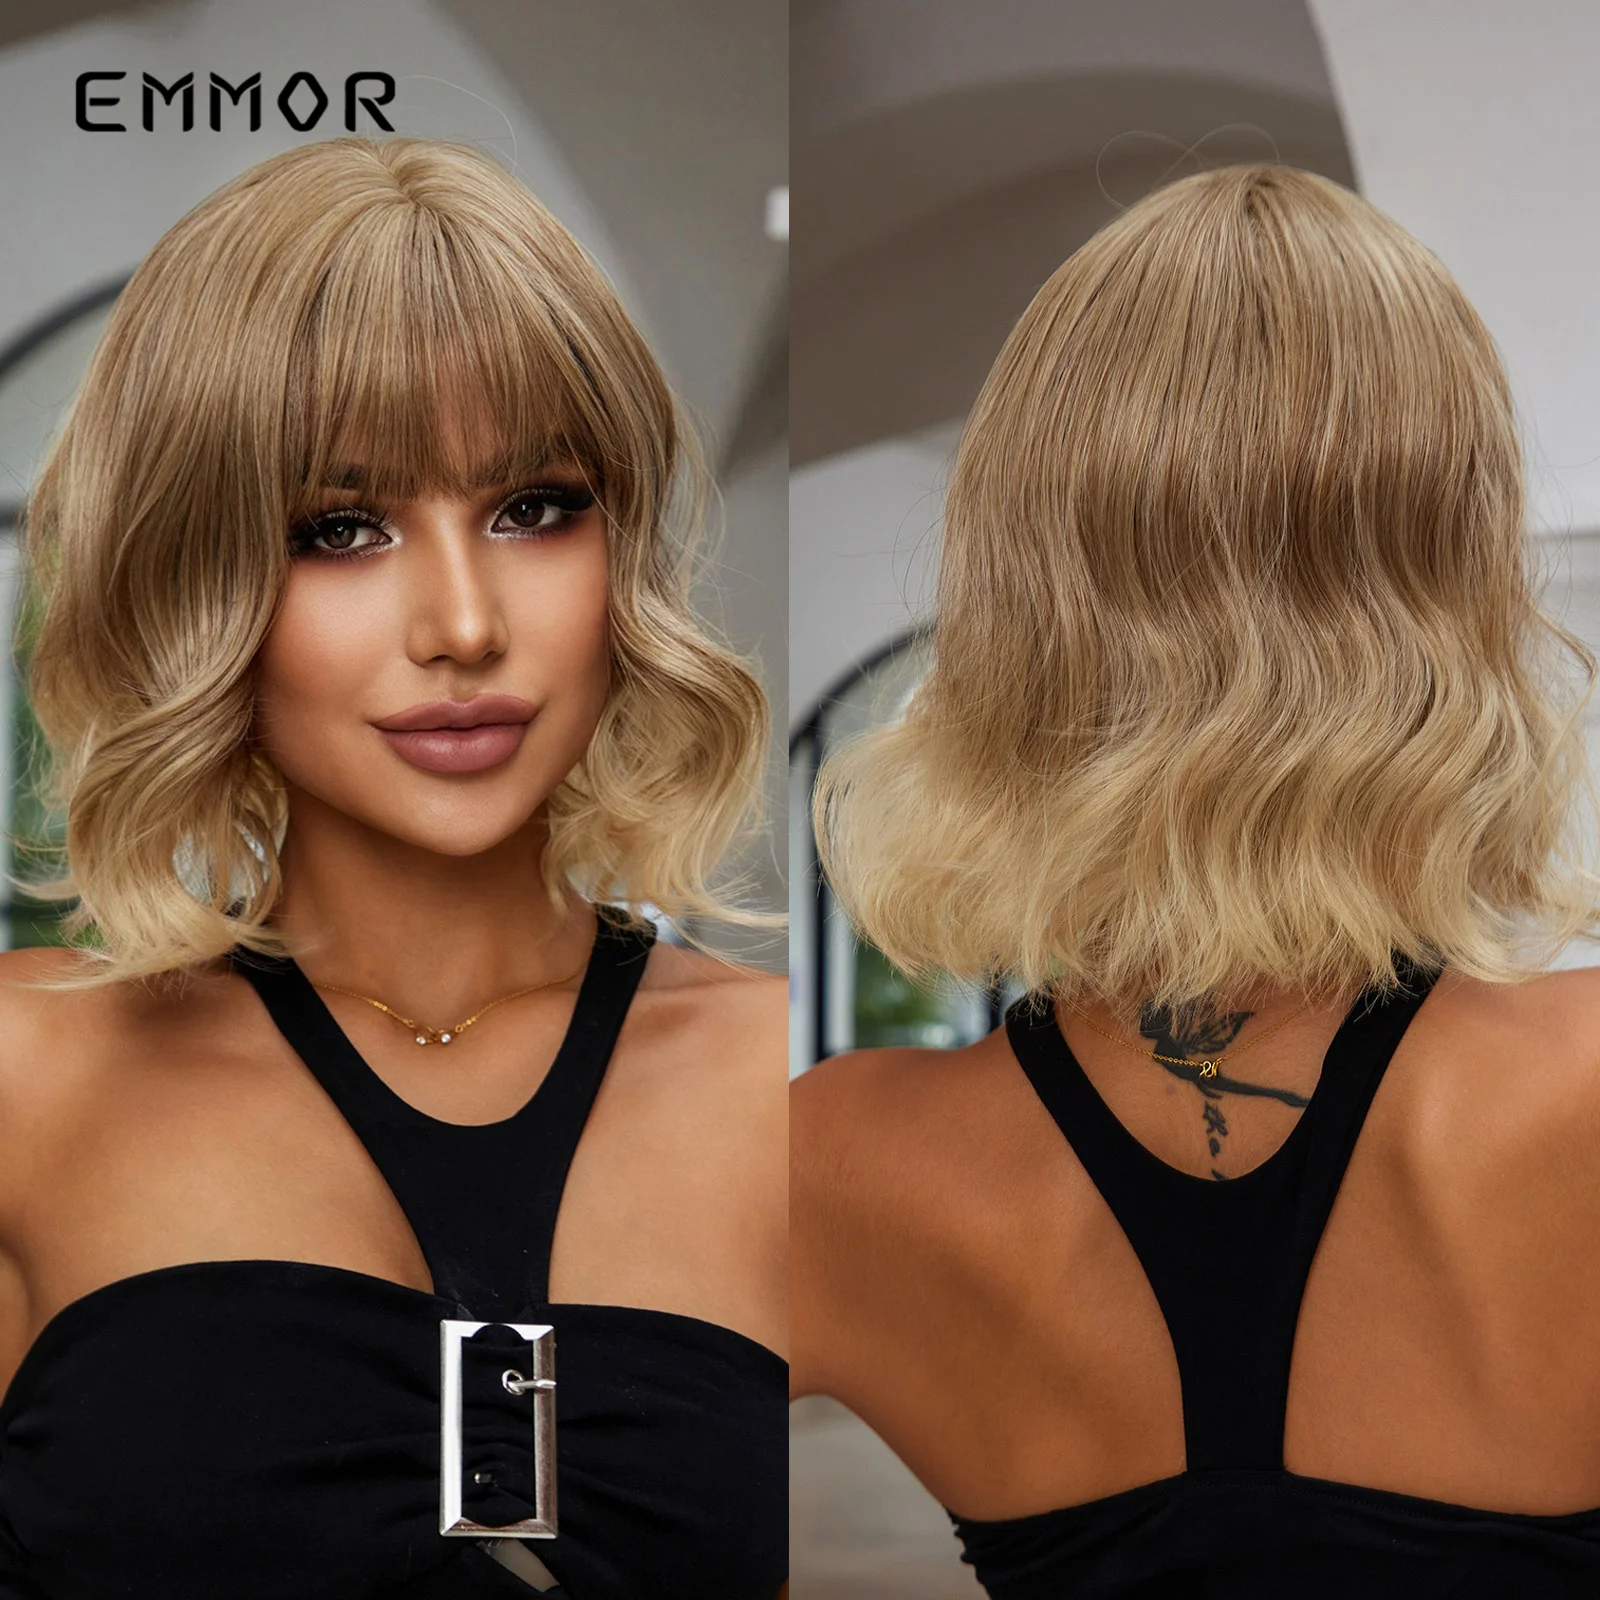 

Emmor Ombre Blonde Short Wavy Cosplay Lolita Wigs with Bangs Light Brown Bob Synthetic Hair Wigs for Women Heat Resistant Fiber